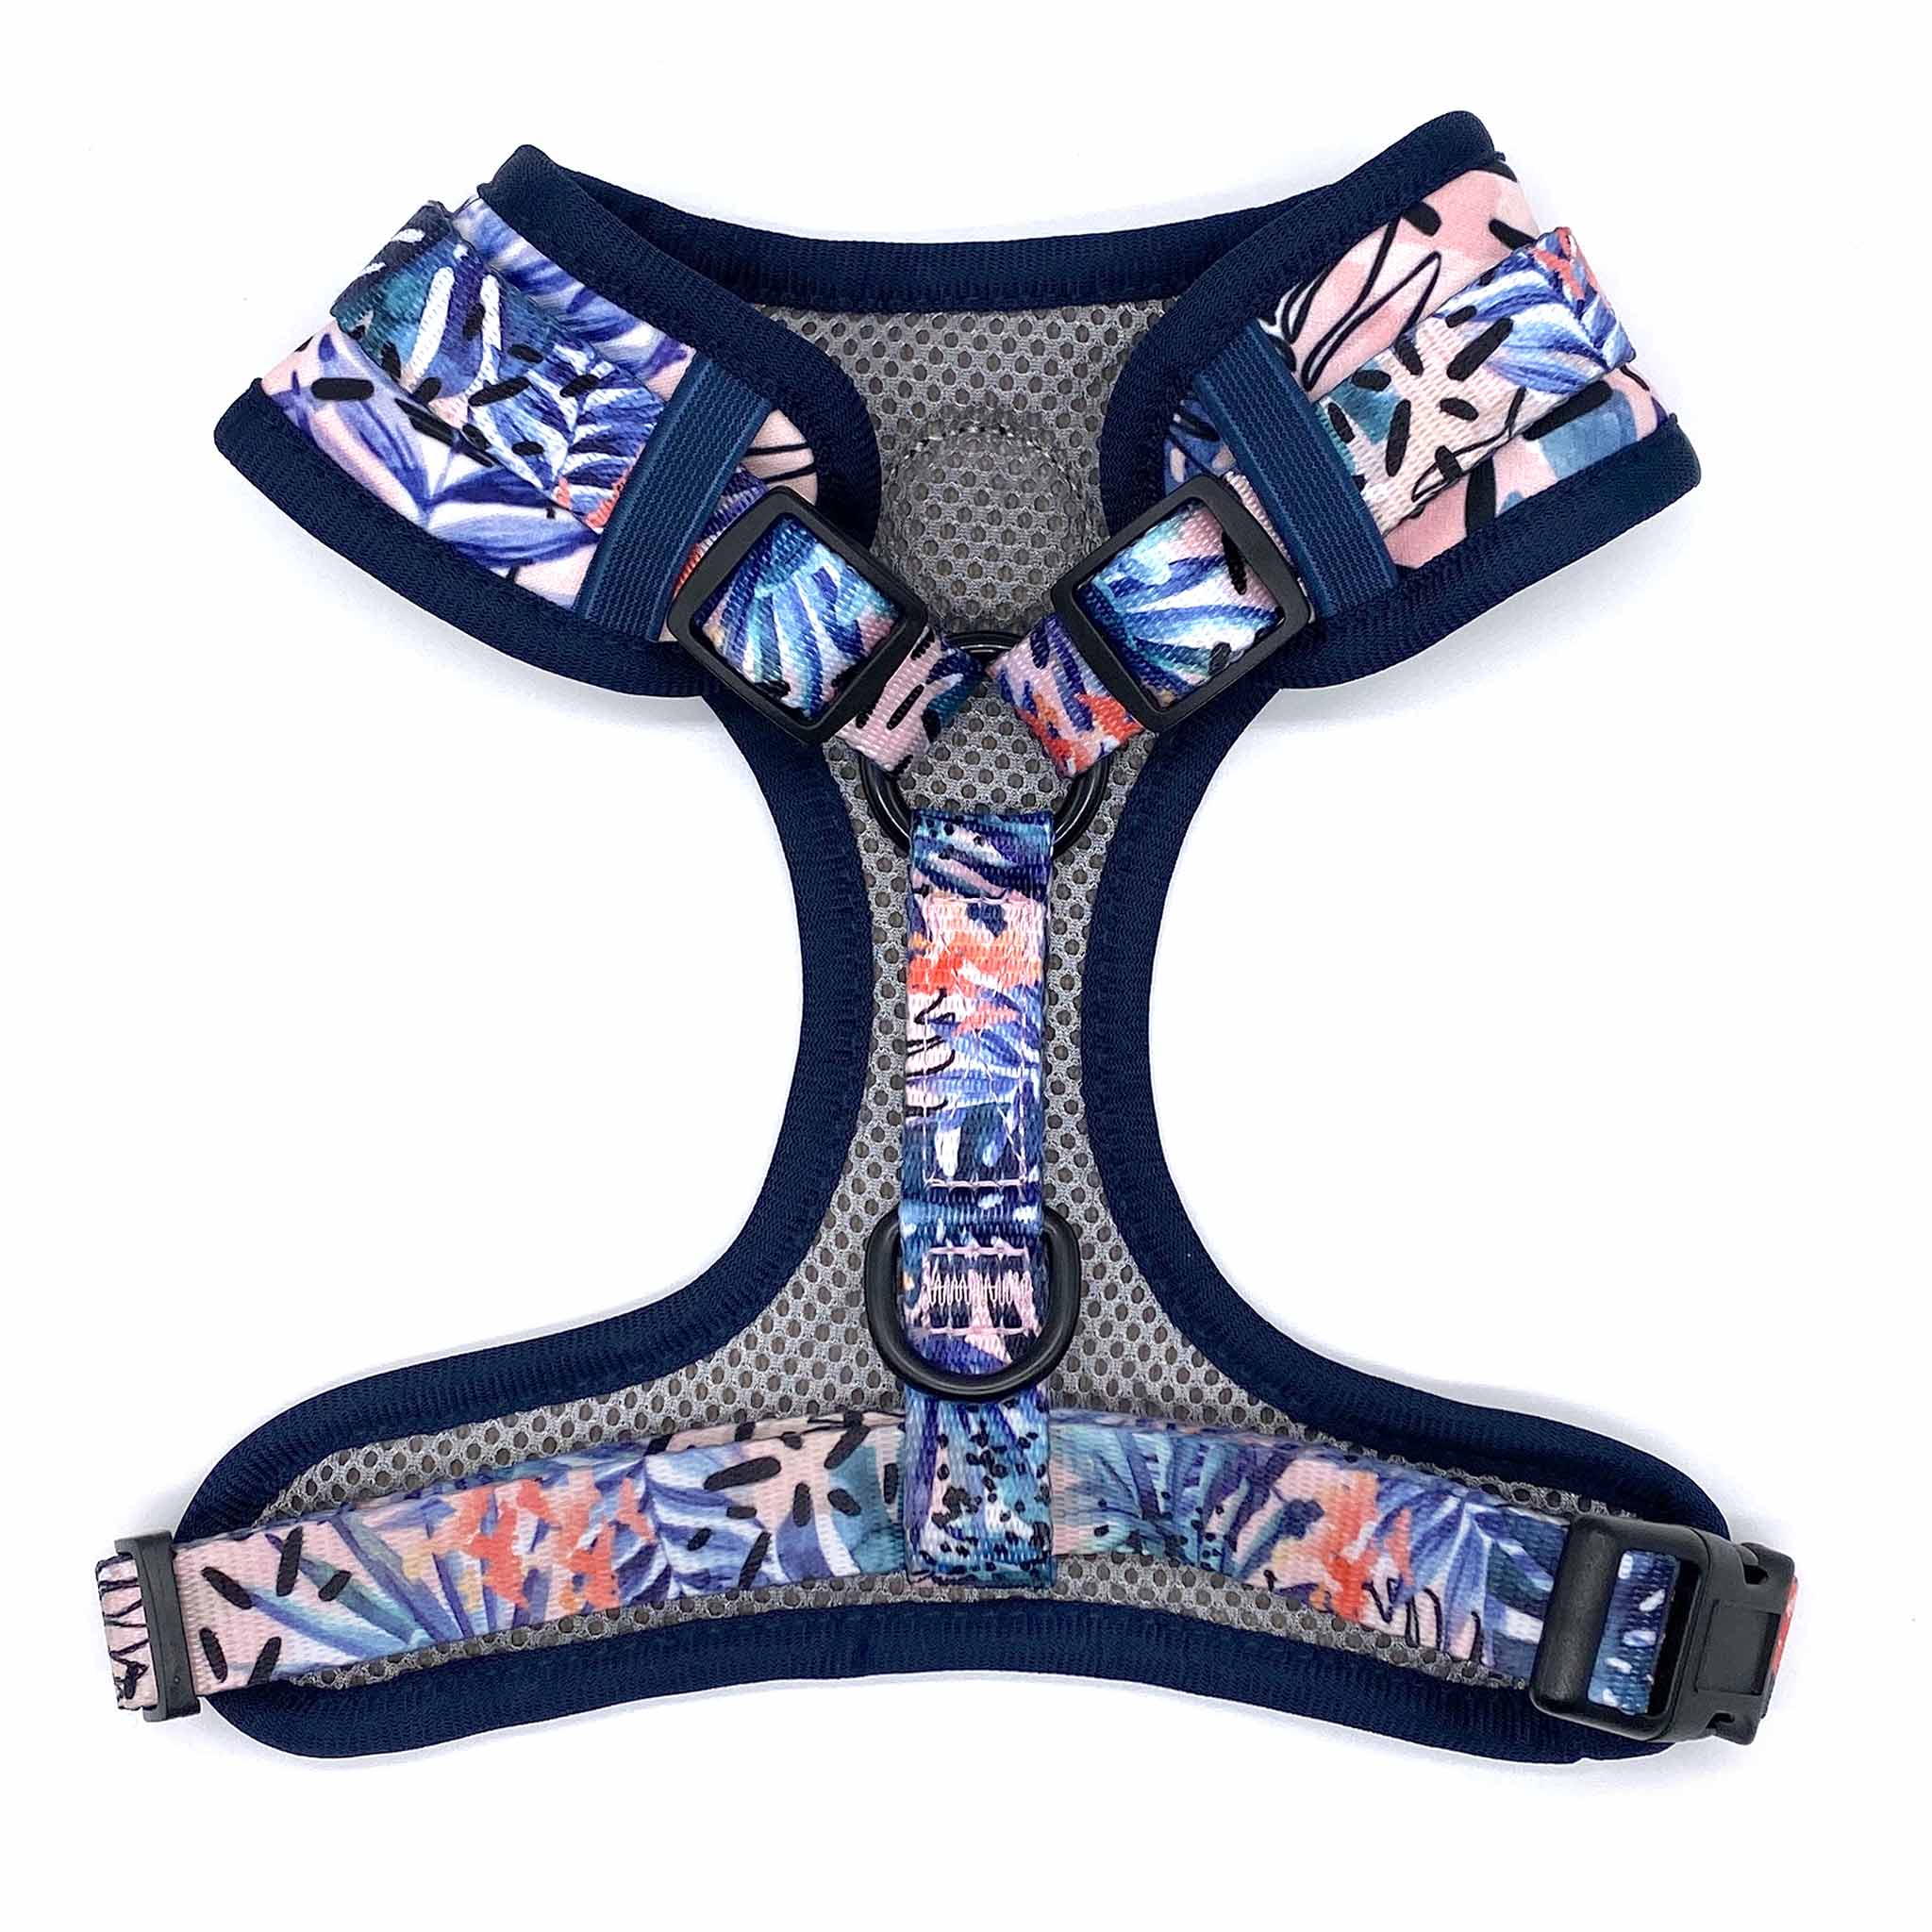 Back view of Pipco Pets adjustable dog harness with Tropic Fronds tropical leaves print pattern in blue